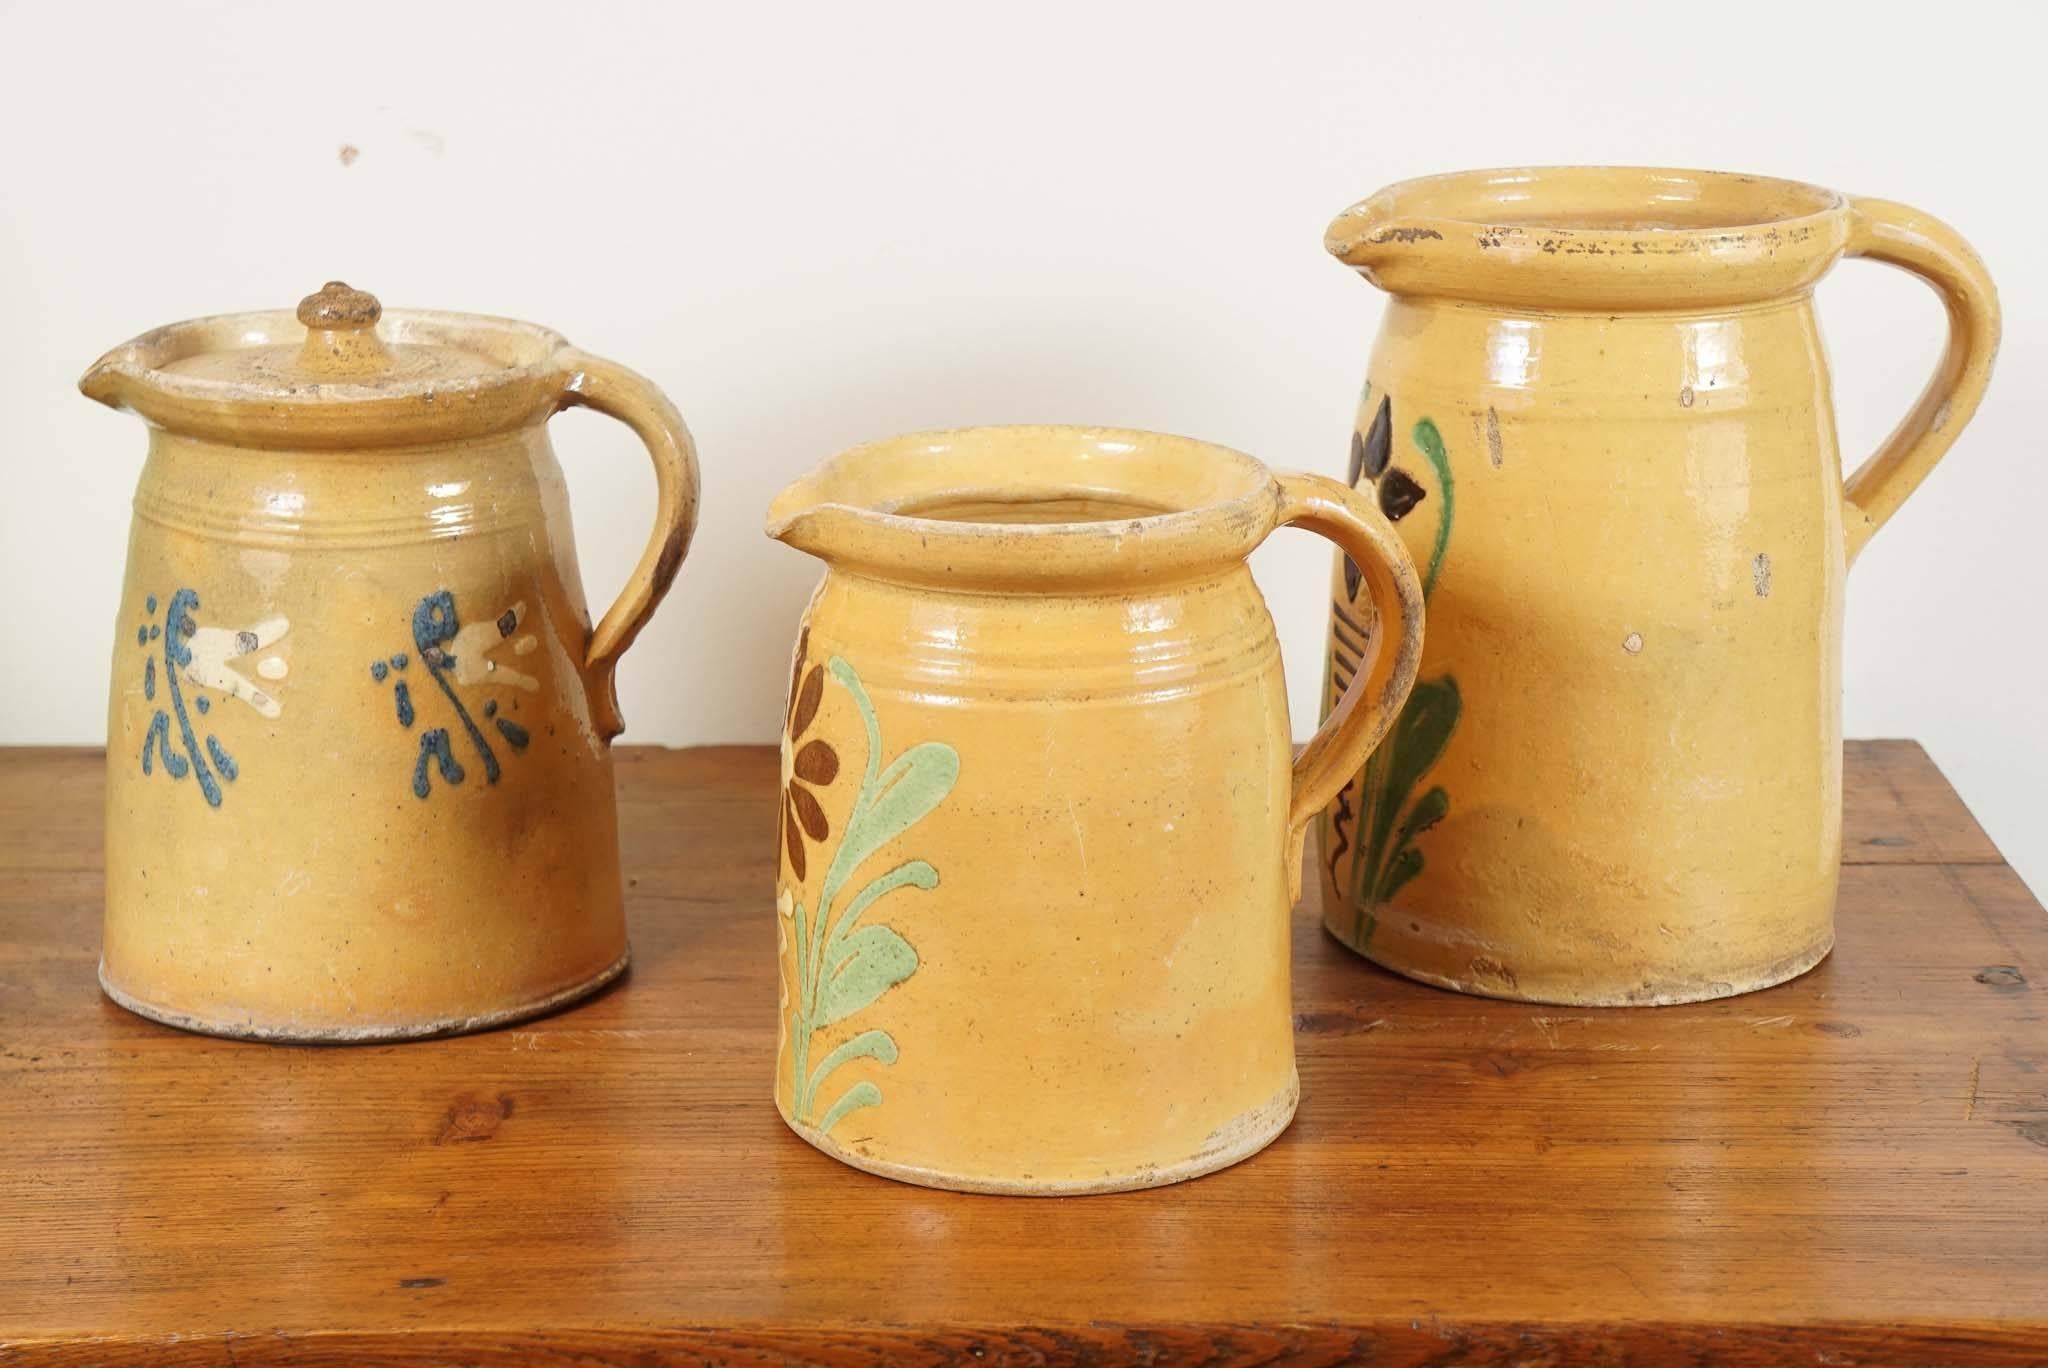 These pieces are part of a larger collection of French pottery. These are beautiful painted pieces from the Alsace region of France. We love this collection and are showing 3 examples. Please keep in mind that the pricing is for each piece not the